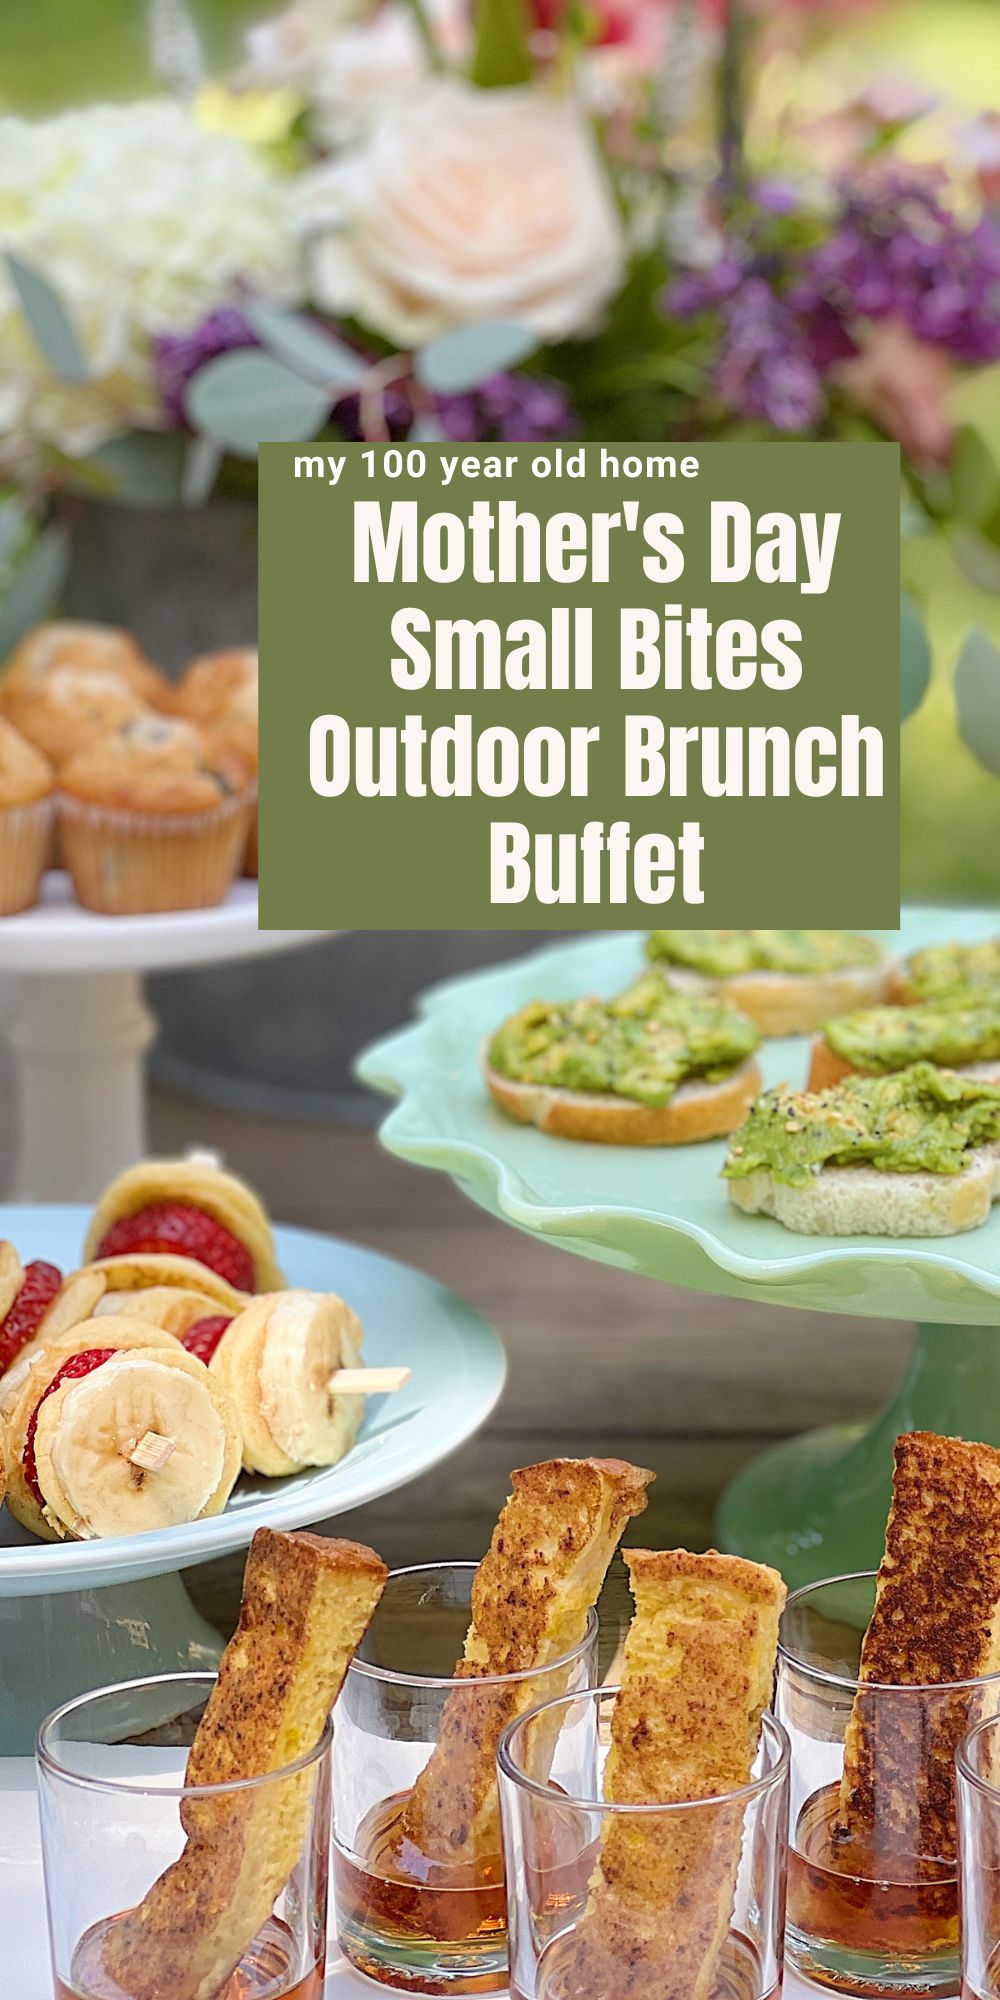 Mother's Day Brunch Buffet has always been a tradition. Today I am sharing some fun recipes for a small bites outdoor brunch buffet!